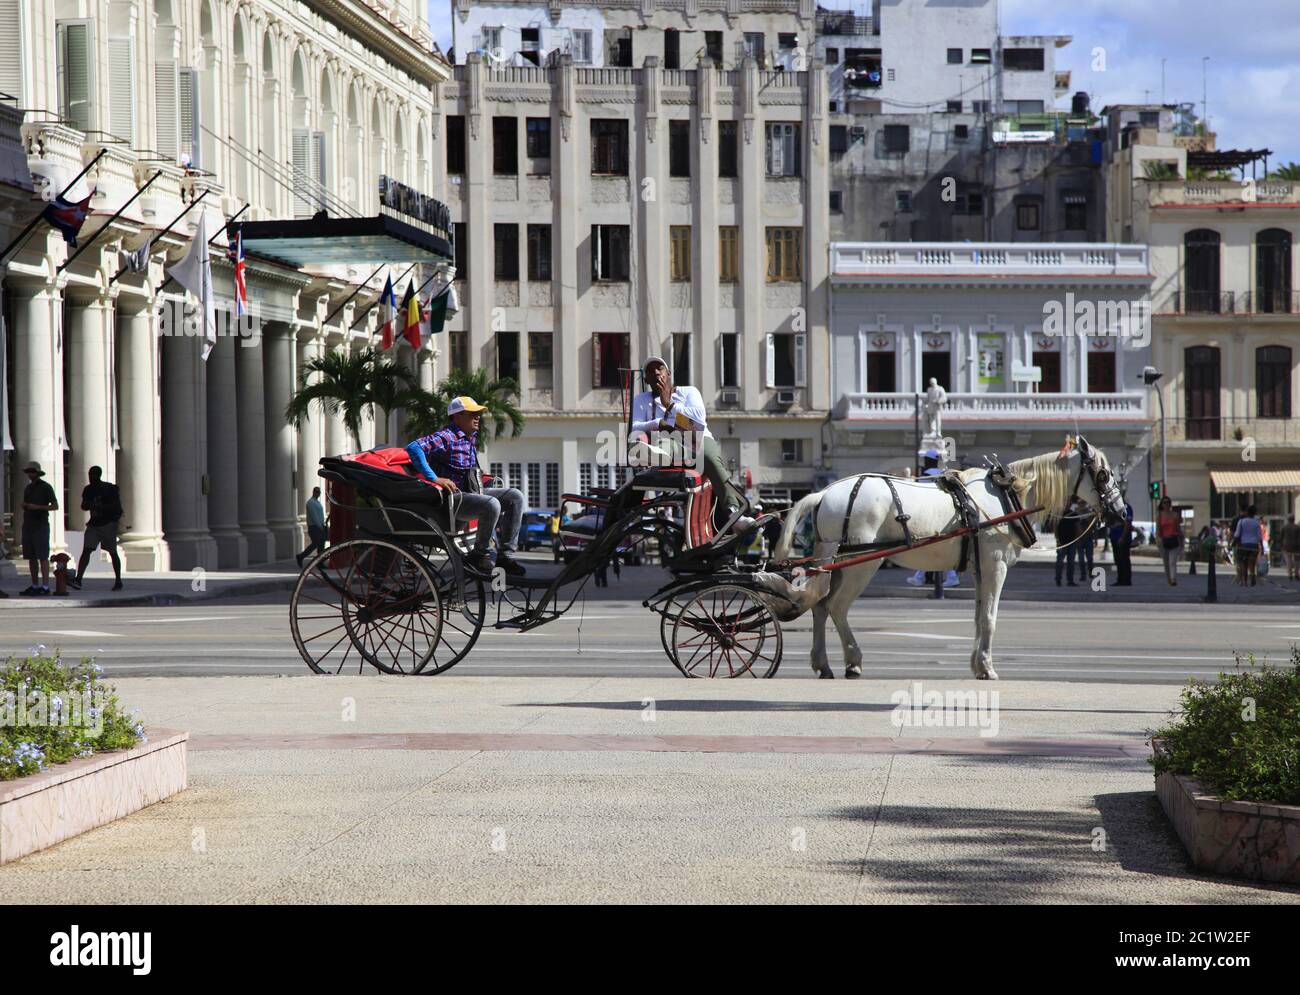 Horse and carriage on the streets of Havana Stock Photo